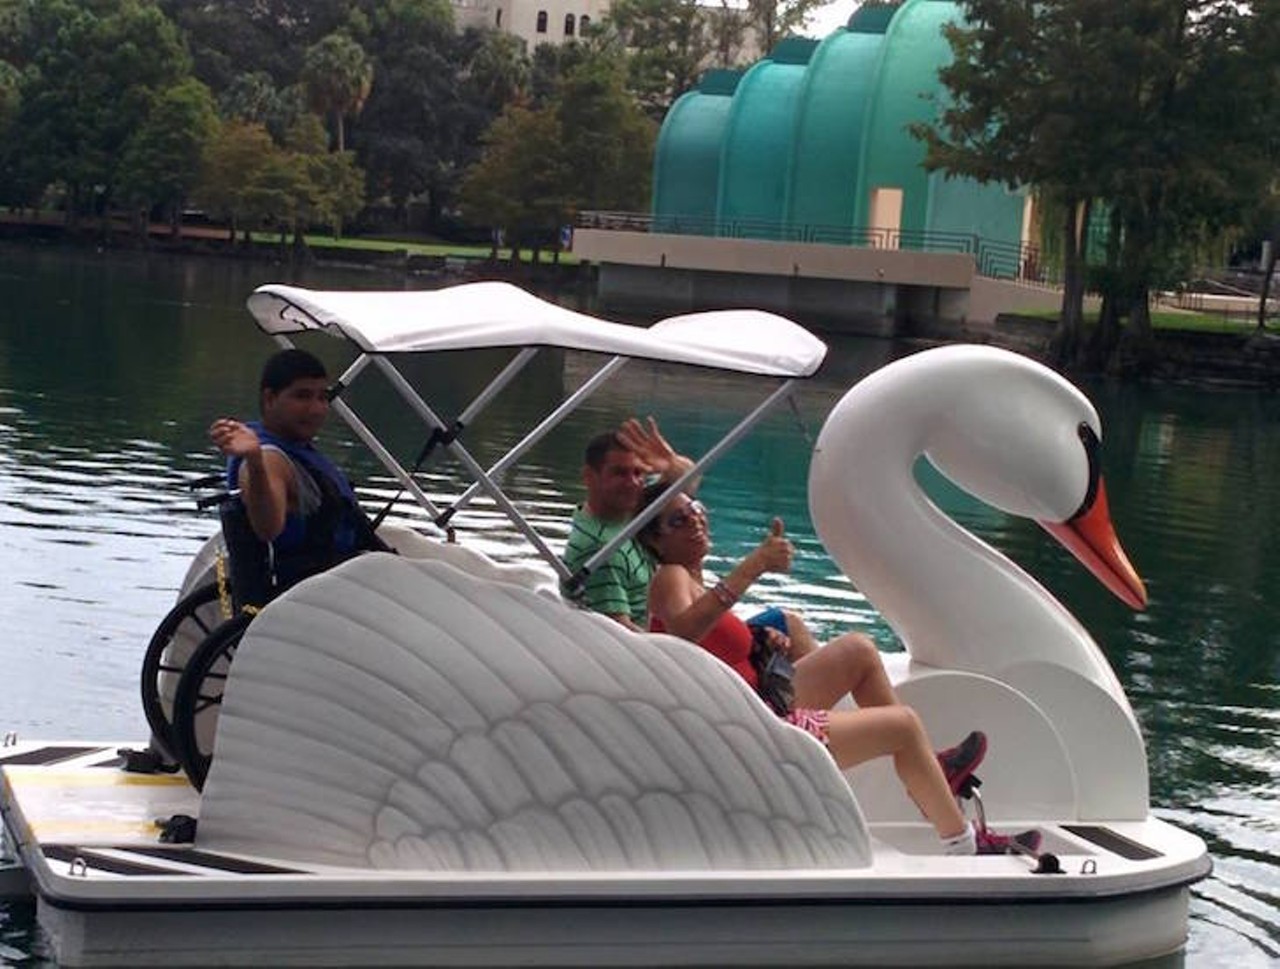 Rent a swan paddleboat at Lake Eola
512 E. Washington St., 407-246-4484 
Lake Eola is symbolic of and to Orlando. Smack dab in the middle of downtown, you can walk, gawk at the city, feed some swans and even rent a paddleboat shaped just like them. Wonder if that scares them ... 
Photo via Lake Eola Park/Facebook